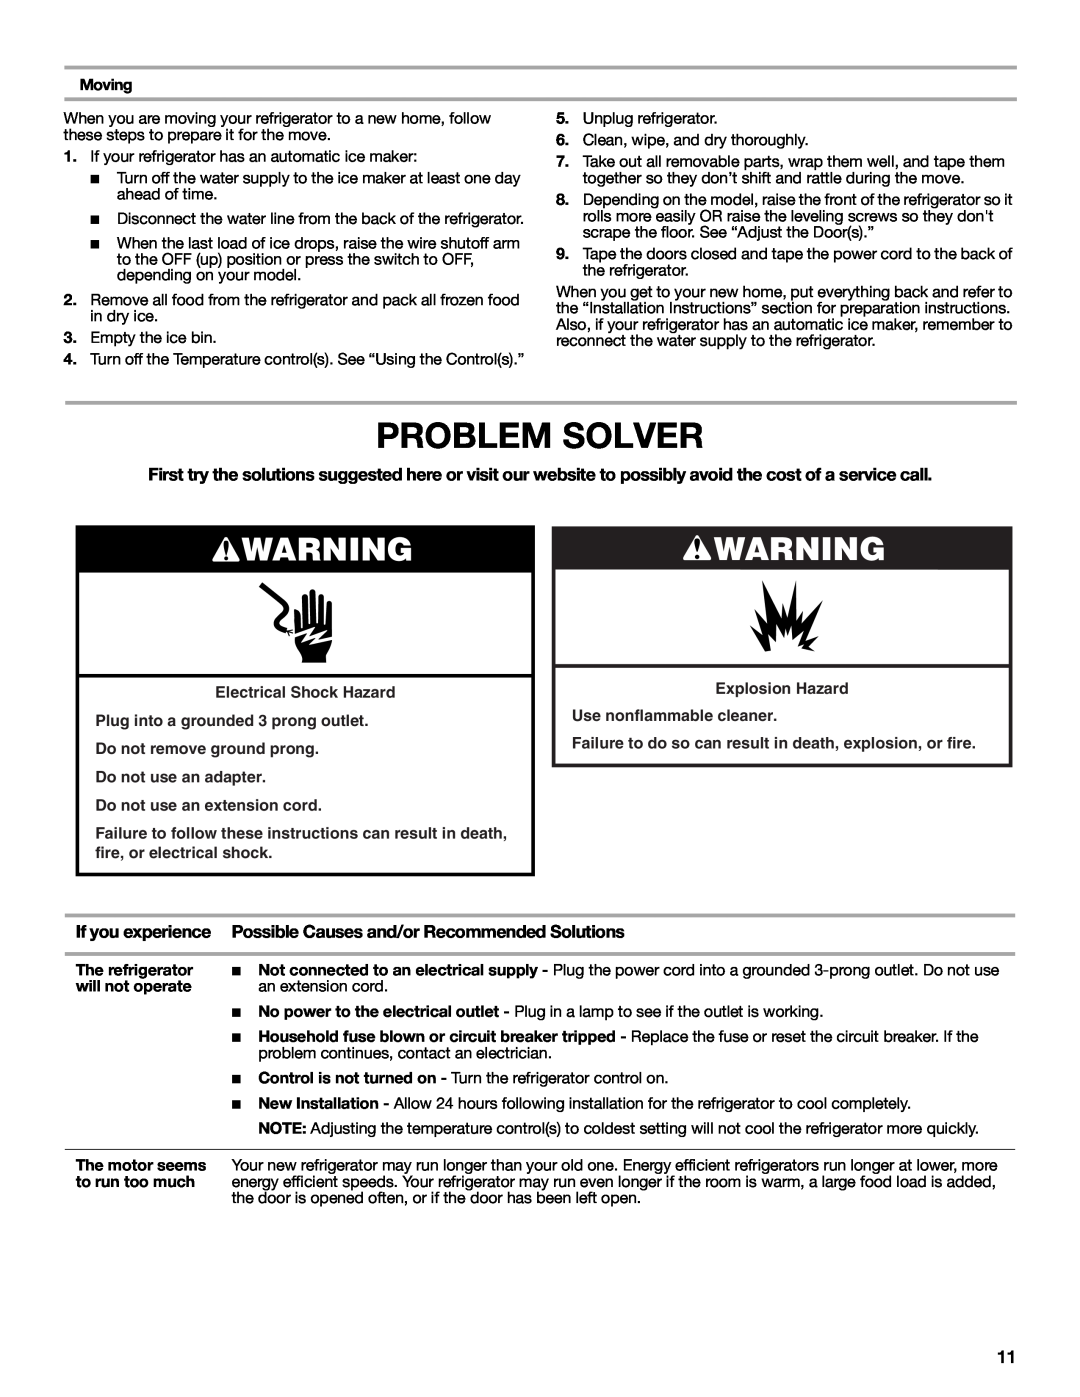 Whirlpool W10475403A Problem Solver, If you experience, Possible Causes and/or Recommended Solutions, Moving 